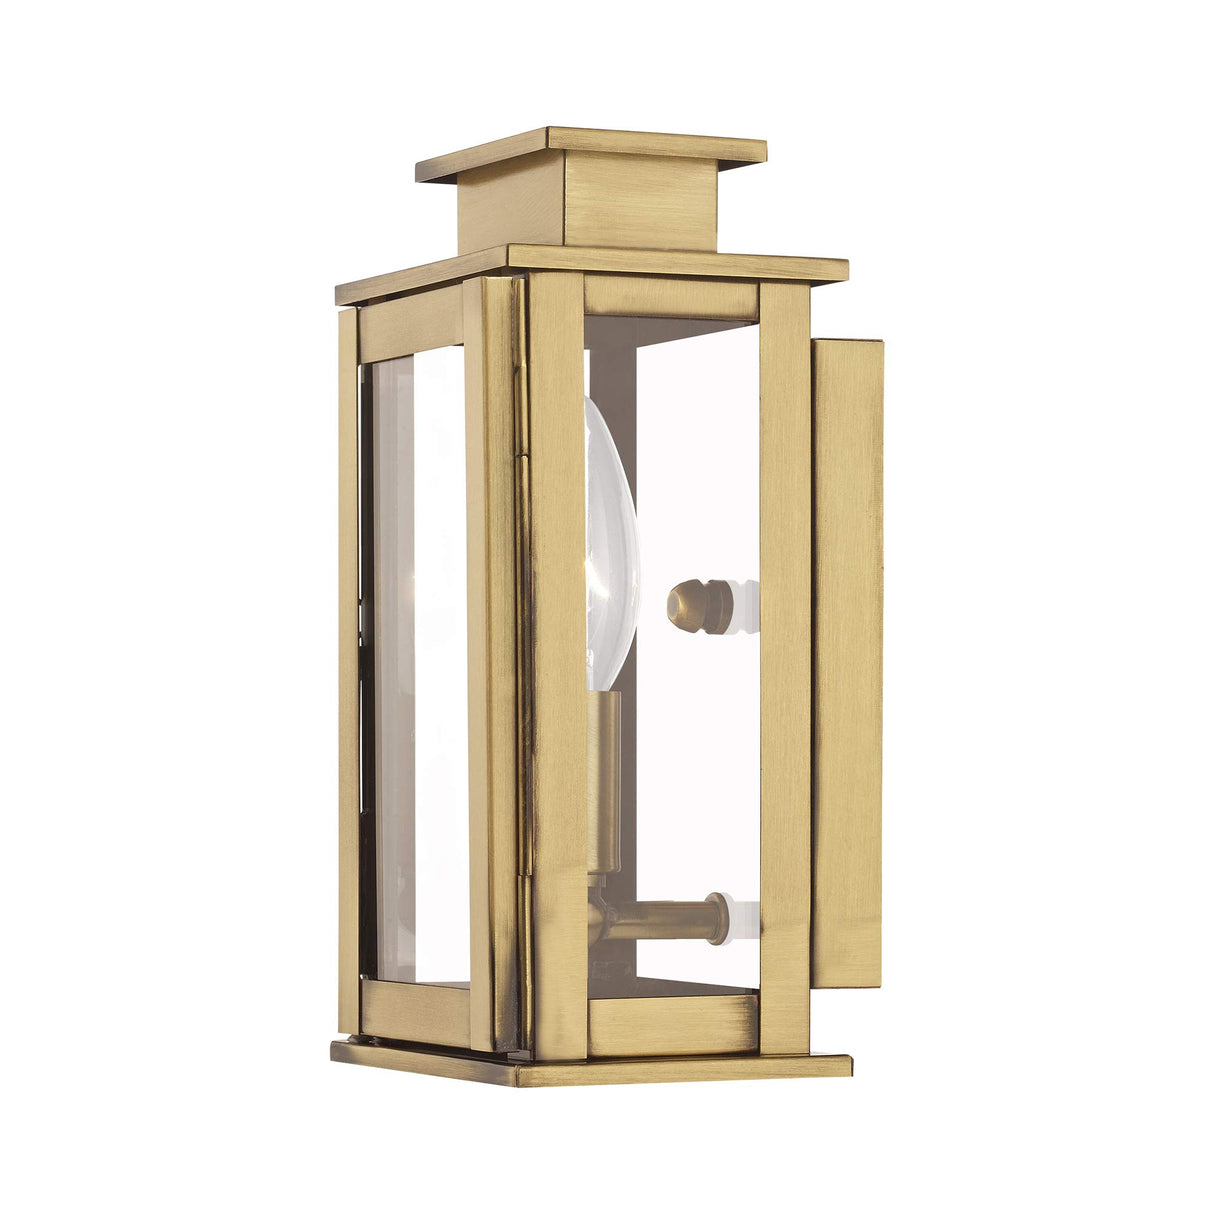 Livex Lighting 20191-01 Transitional One Light Outdoor Wall Lantern from Princeton Collection Finish, Antique Brass